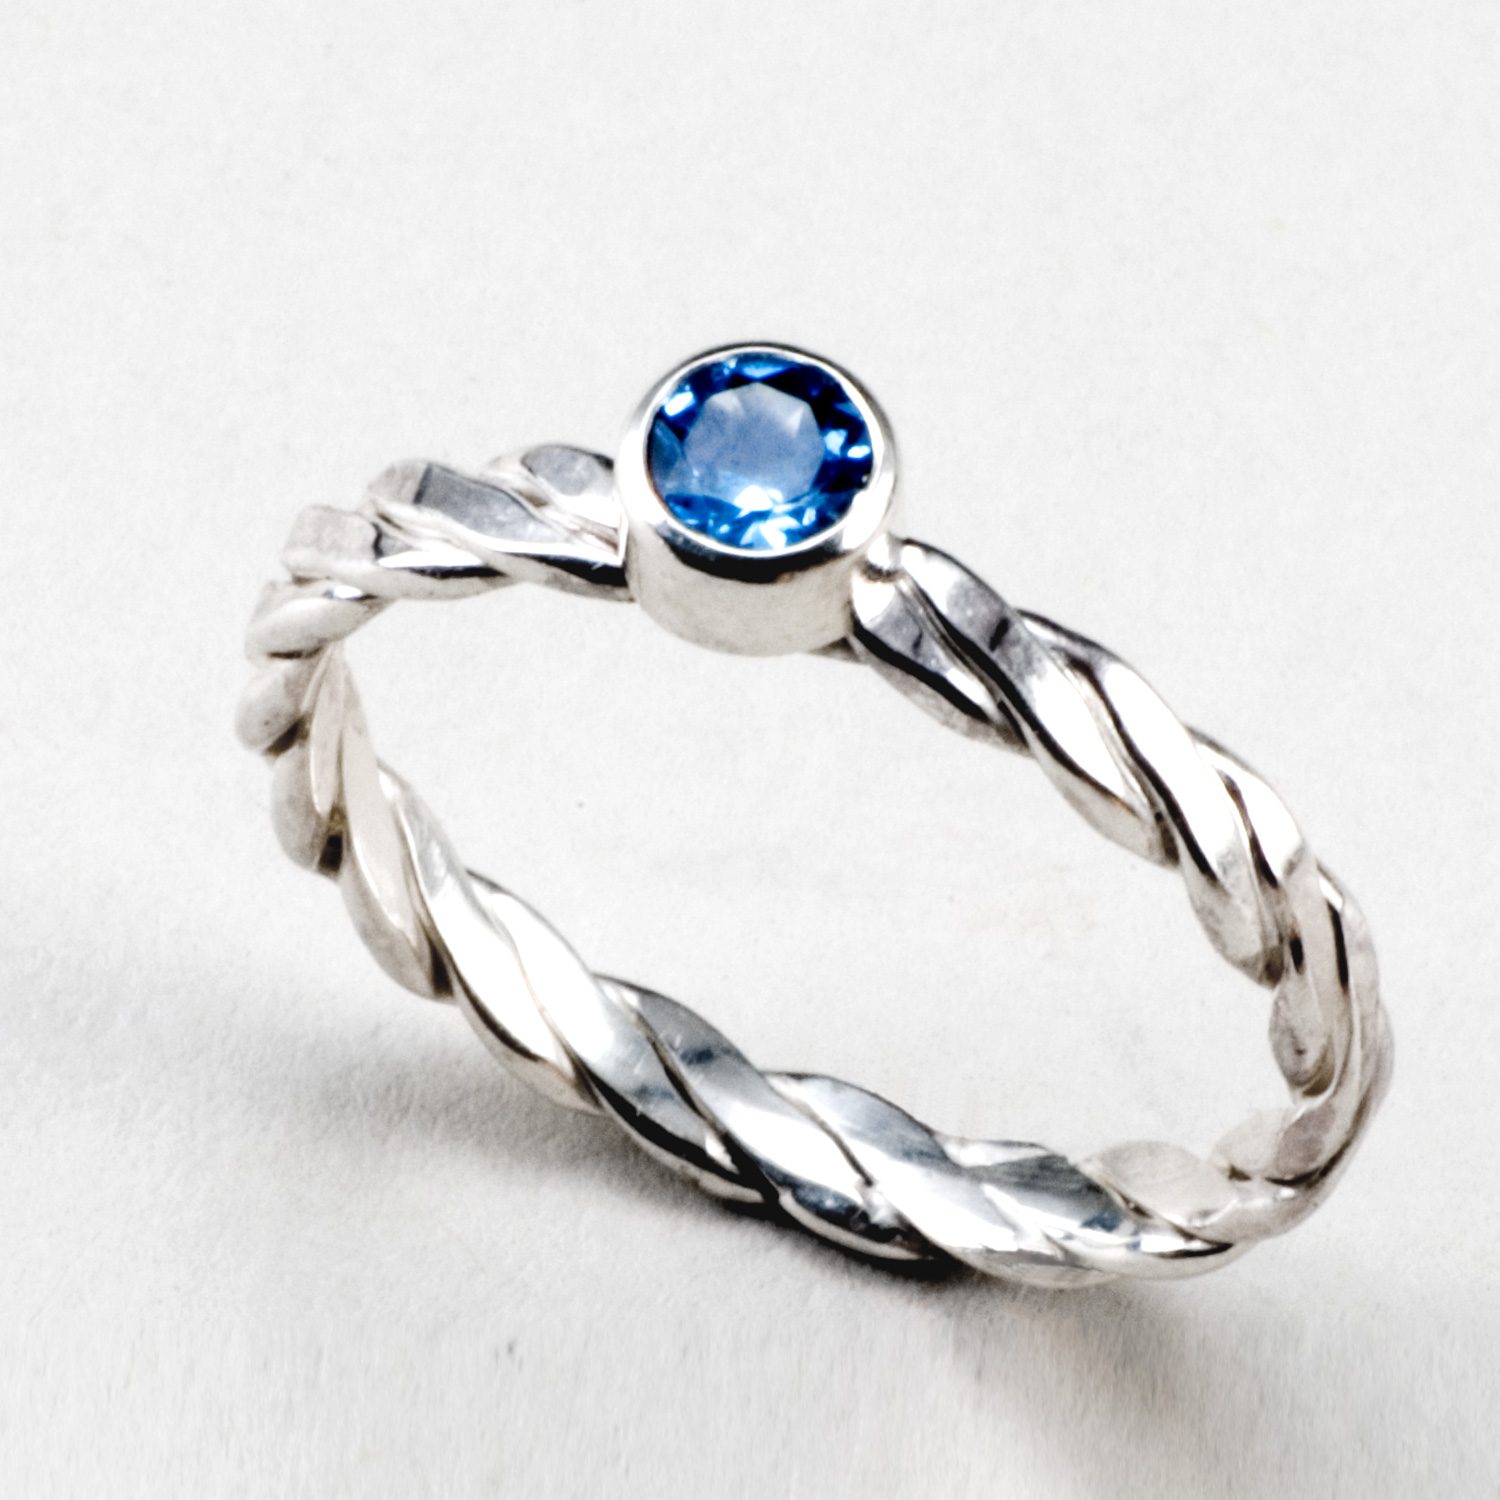 Swiss Blue Stack Twist Ring in sterling silver by Tamberlaine